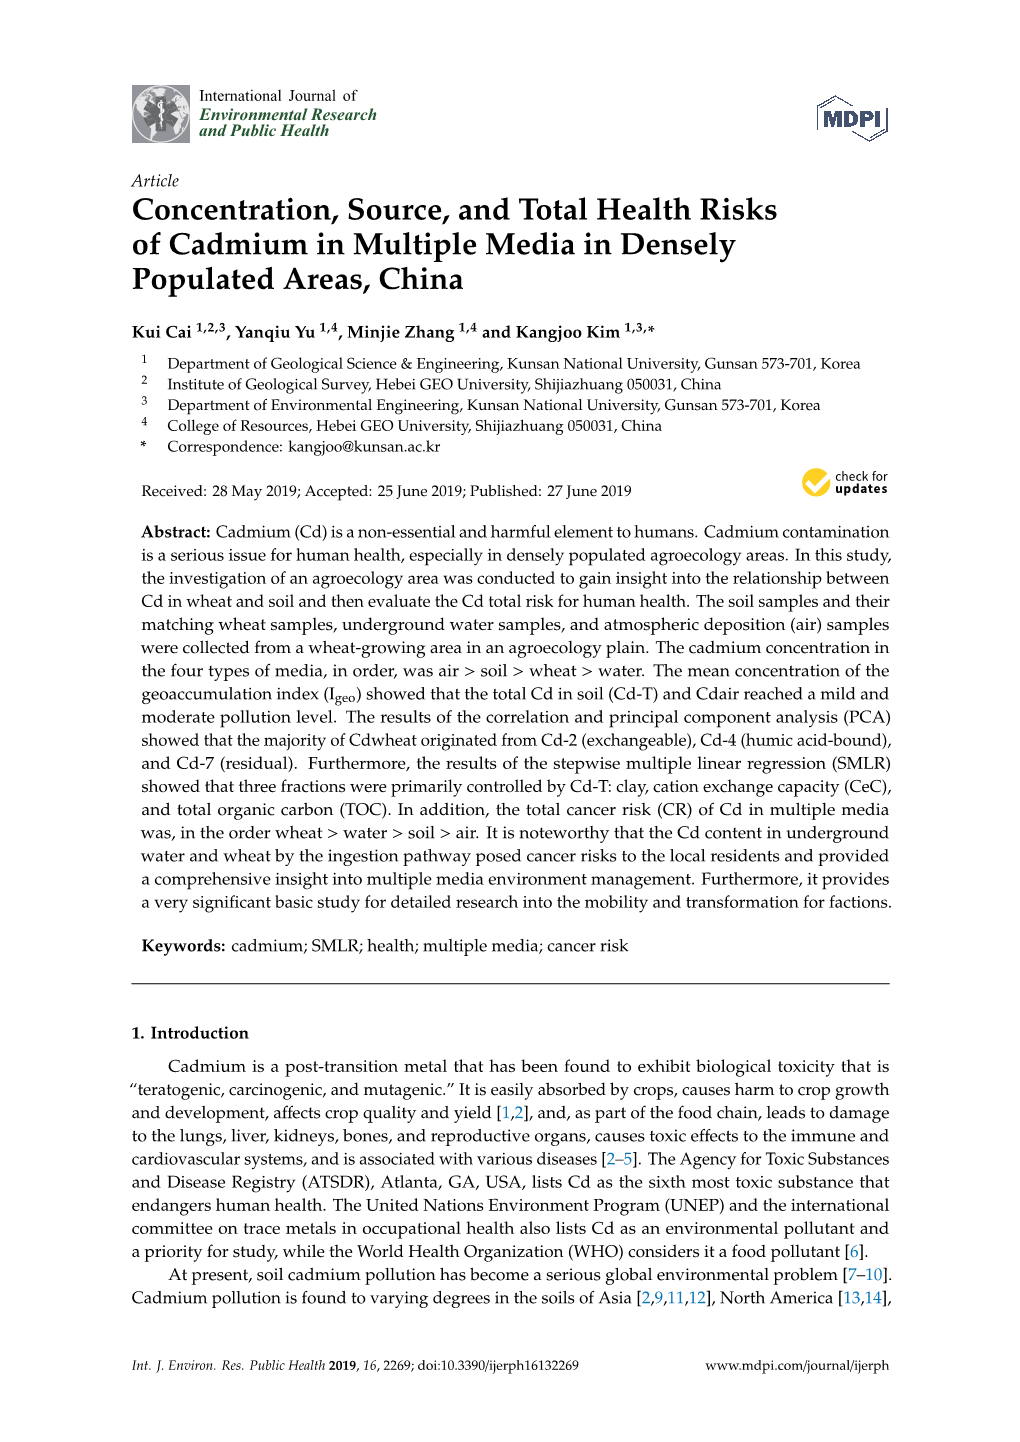 Concentration, Source, and Total Health Risks of Cadmium in Multiple Media in Densely Populated Areas, China